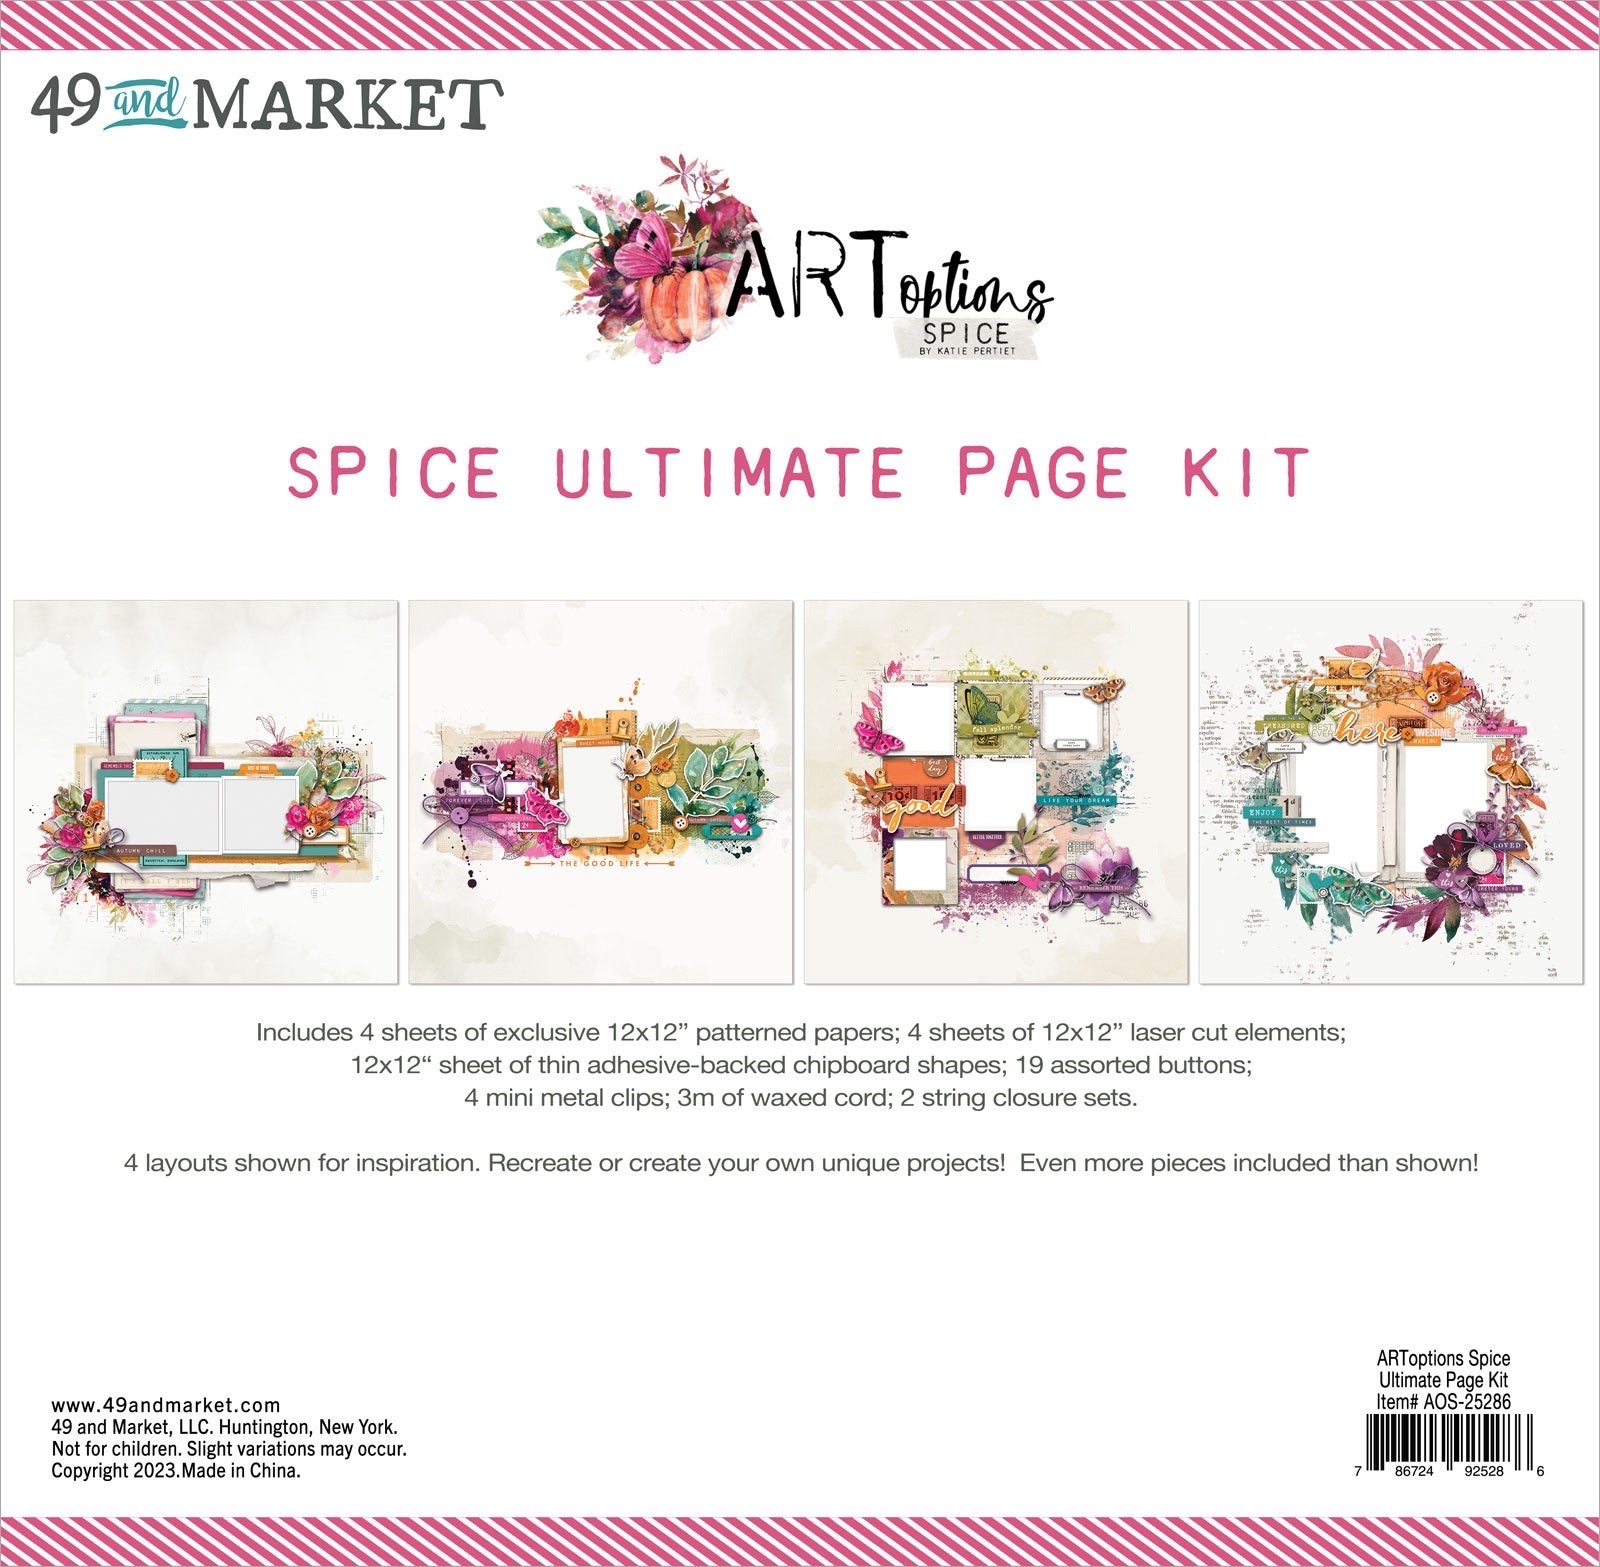 49 and Market Artoptions SPICE ULTIMATE 12x12 PAGE KIT